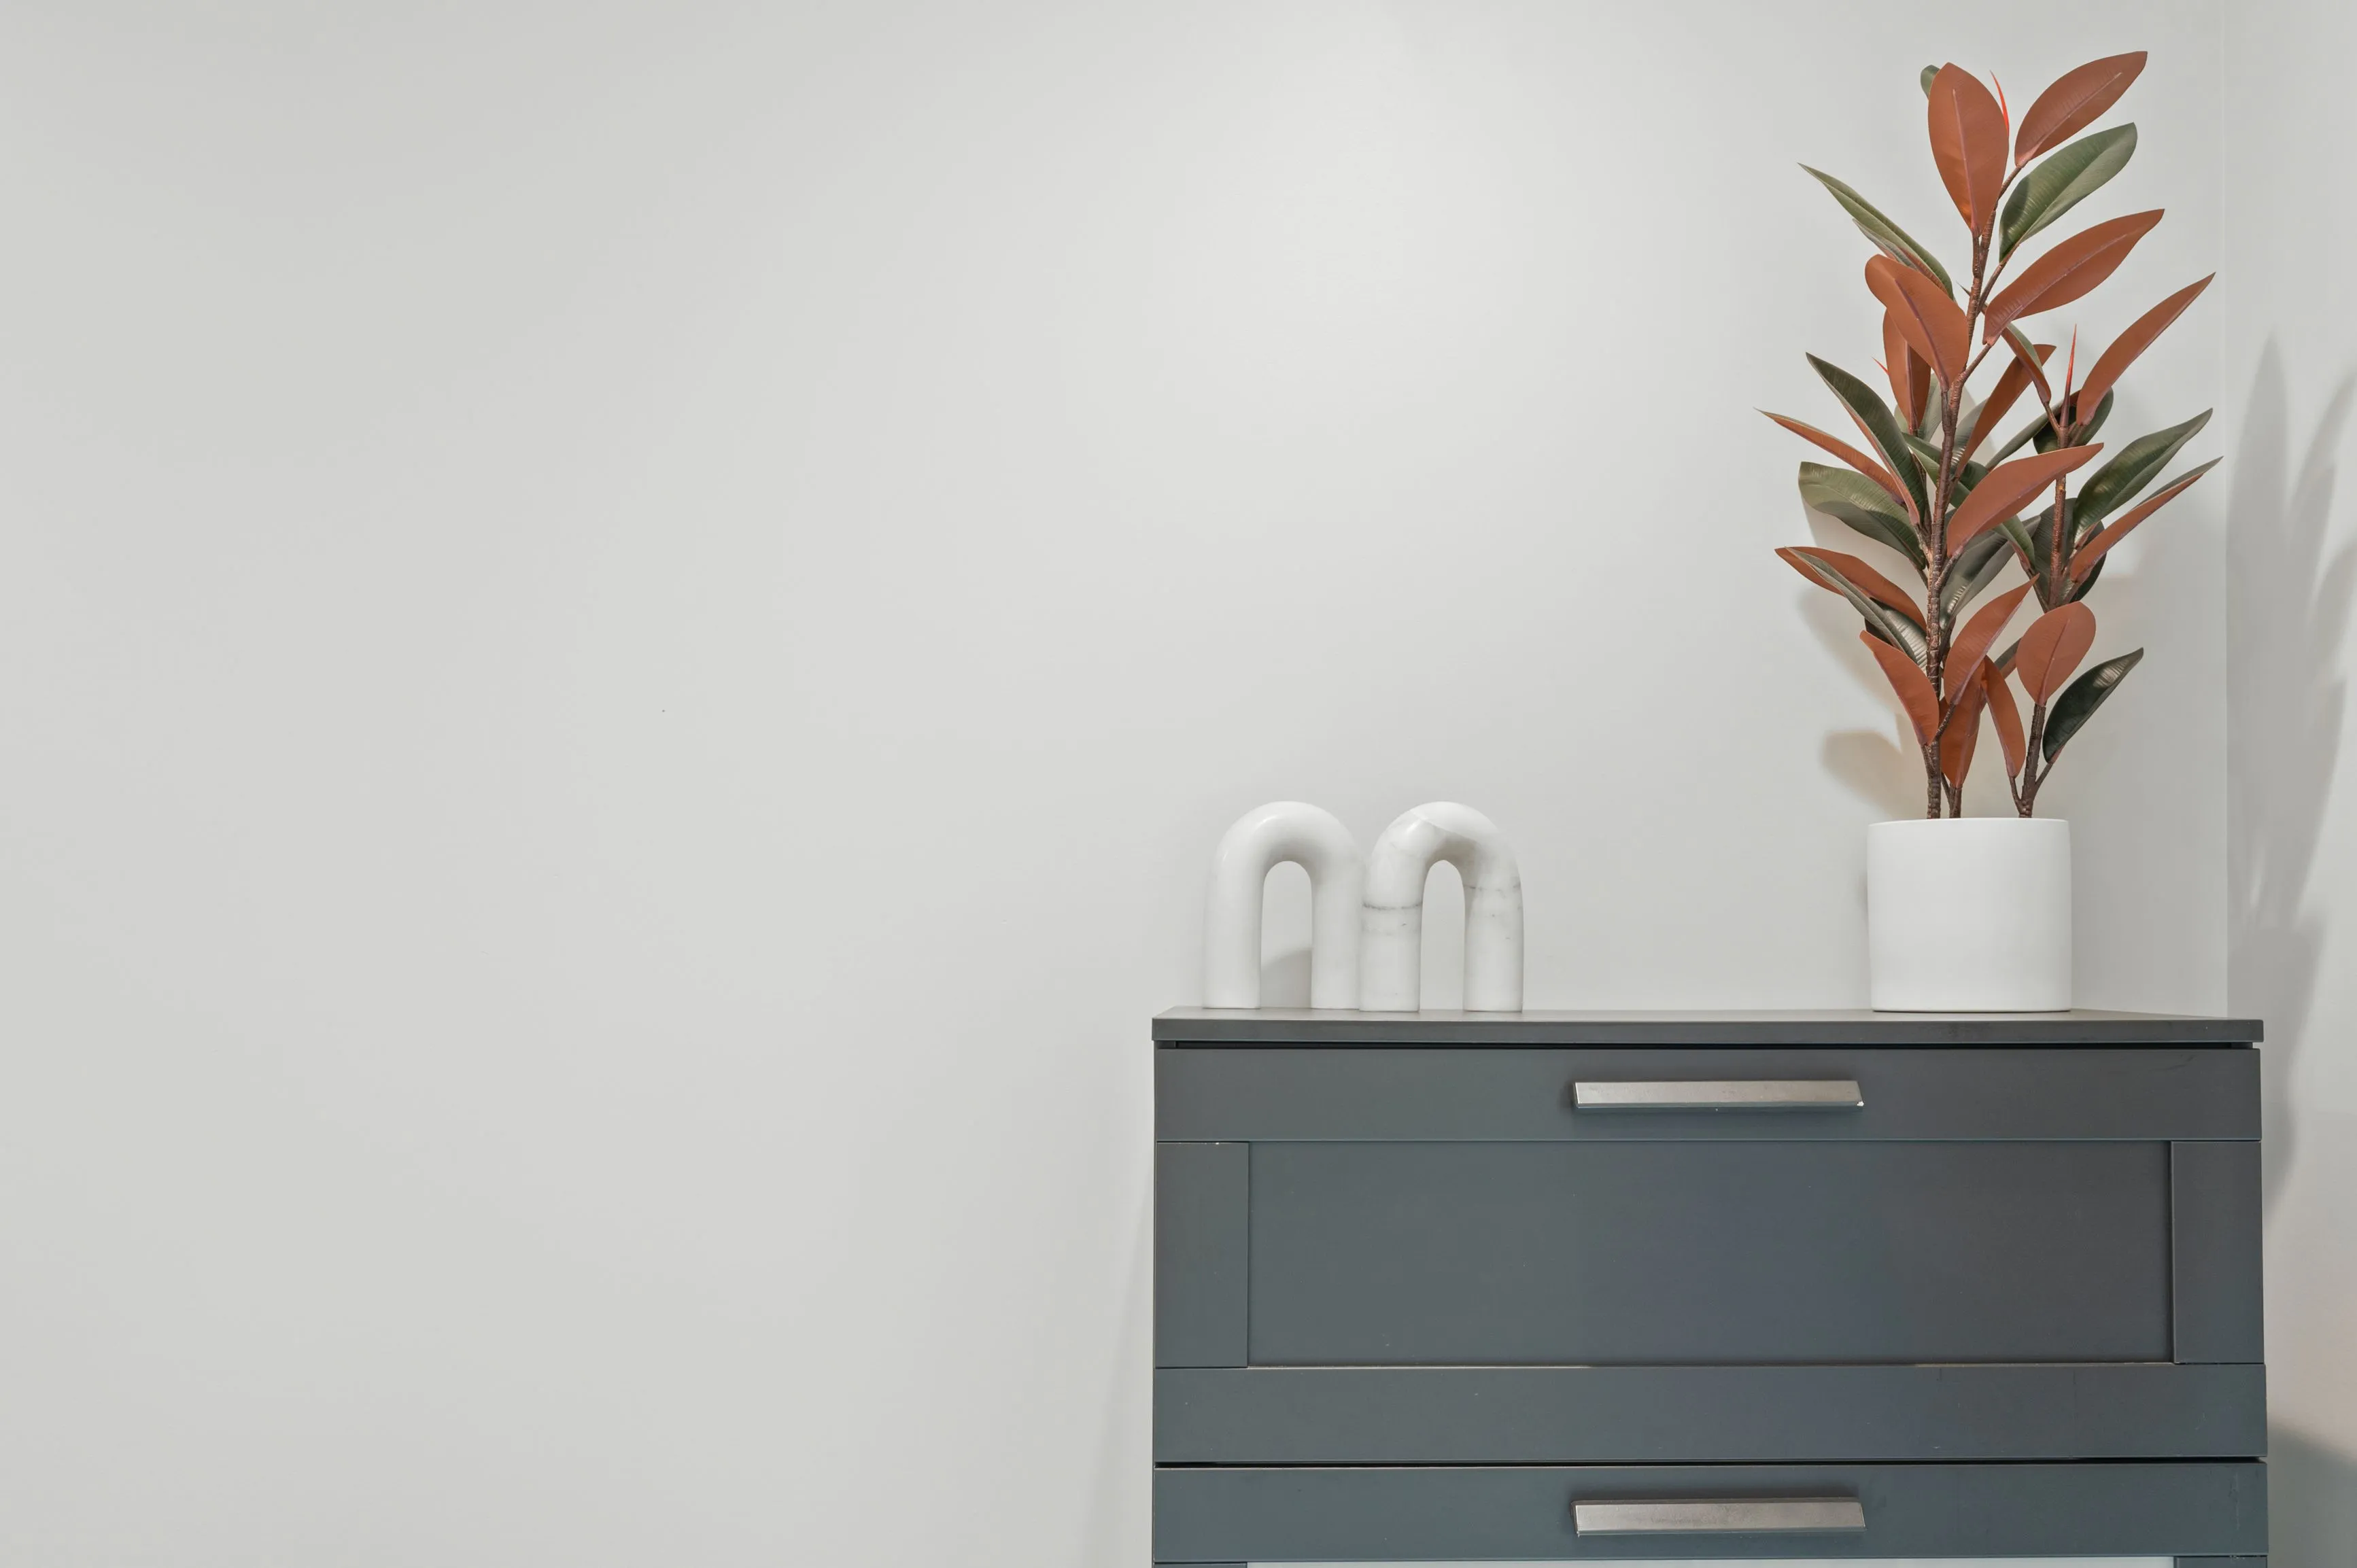 A minimalist room with a dark grey chest of drawers on the right, topped with a white vase holding a red and green leafy plant, and a pair of white decorative arches.